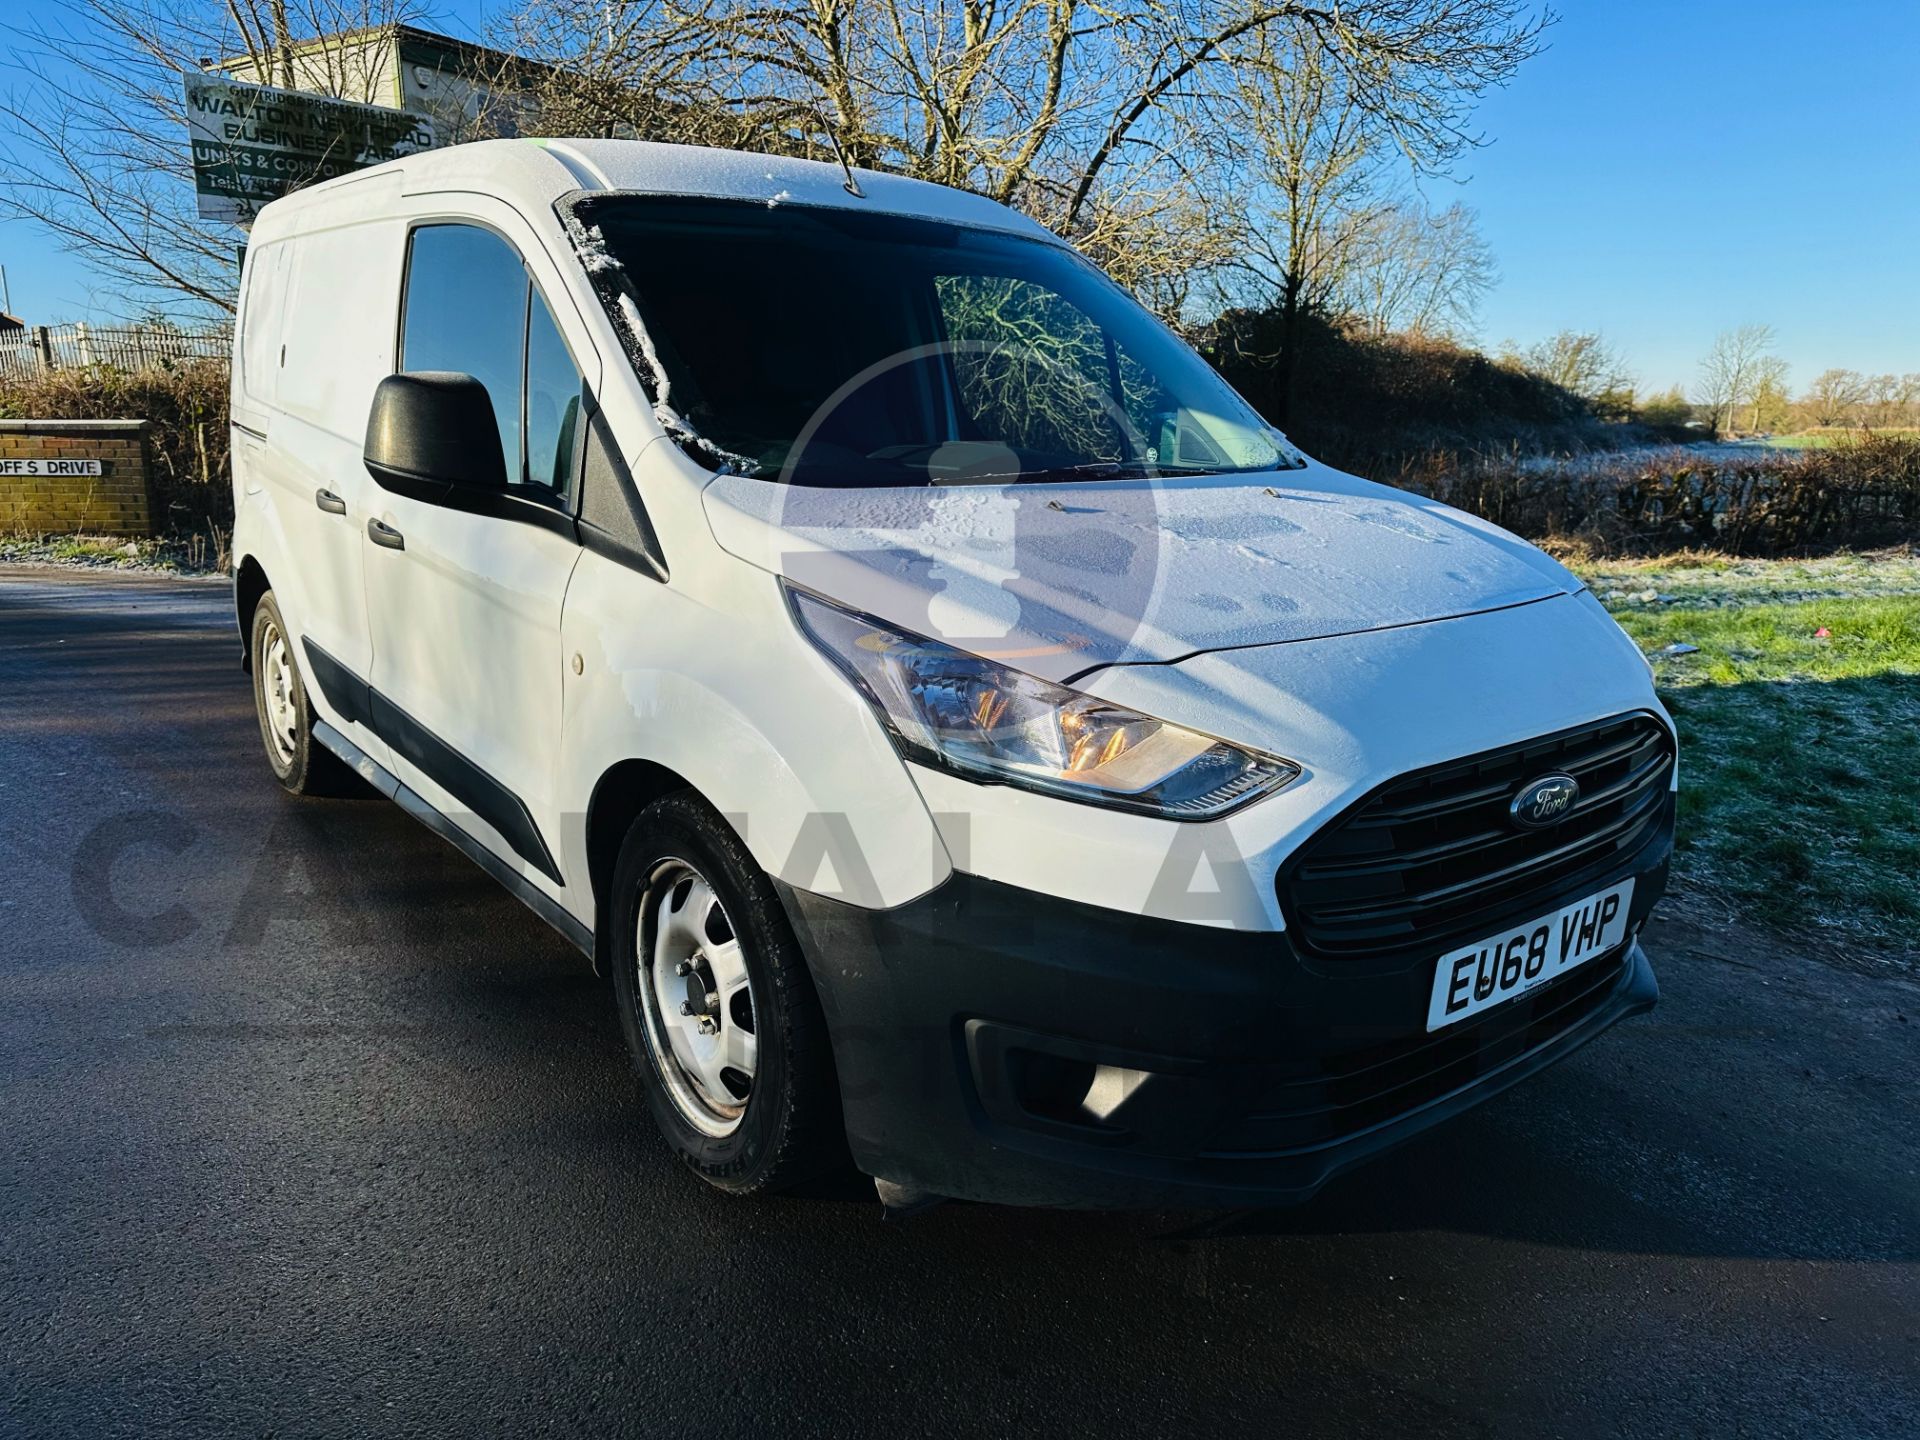 FORD TRANSIT CONNECT 1.5TDCI - 5 SEATER CREW VAN - 2019 MODEL - 1 OWNER FROM NEW - ULEZ COMPLIANT! - Image 2 of 32